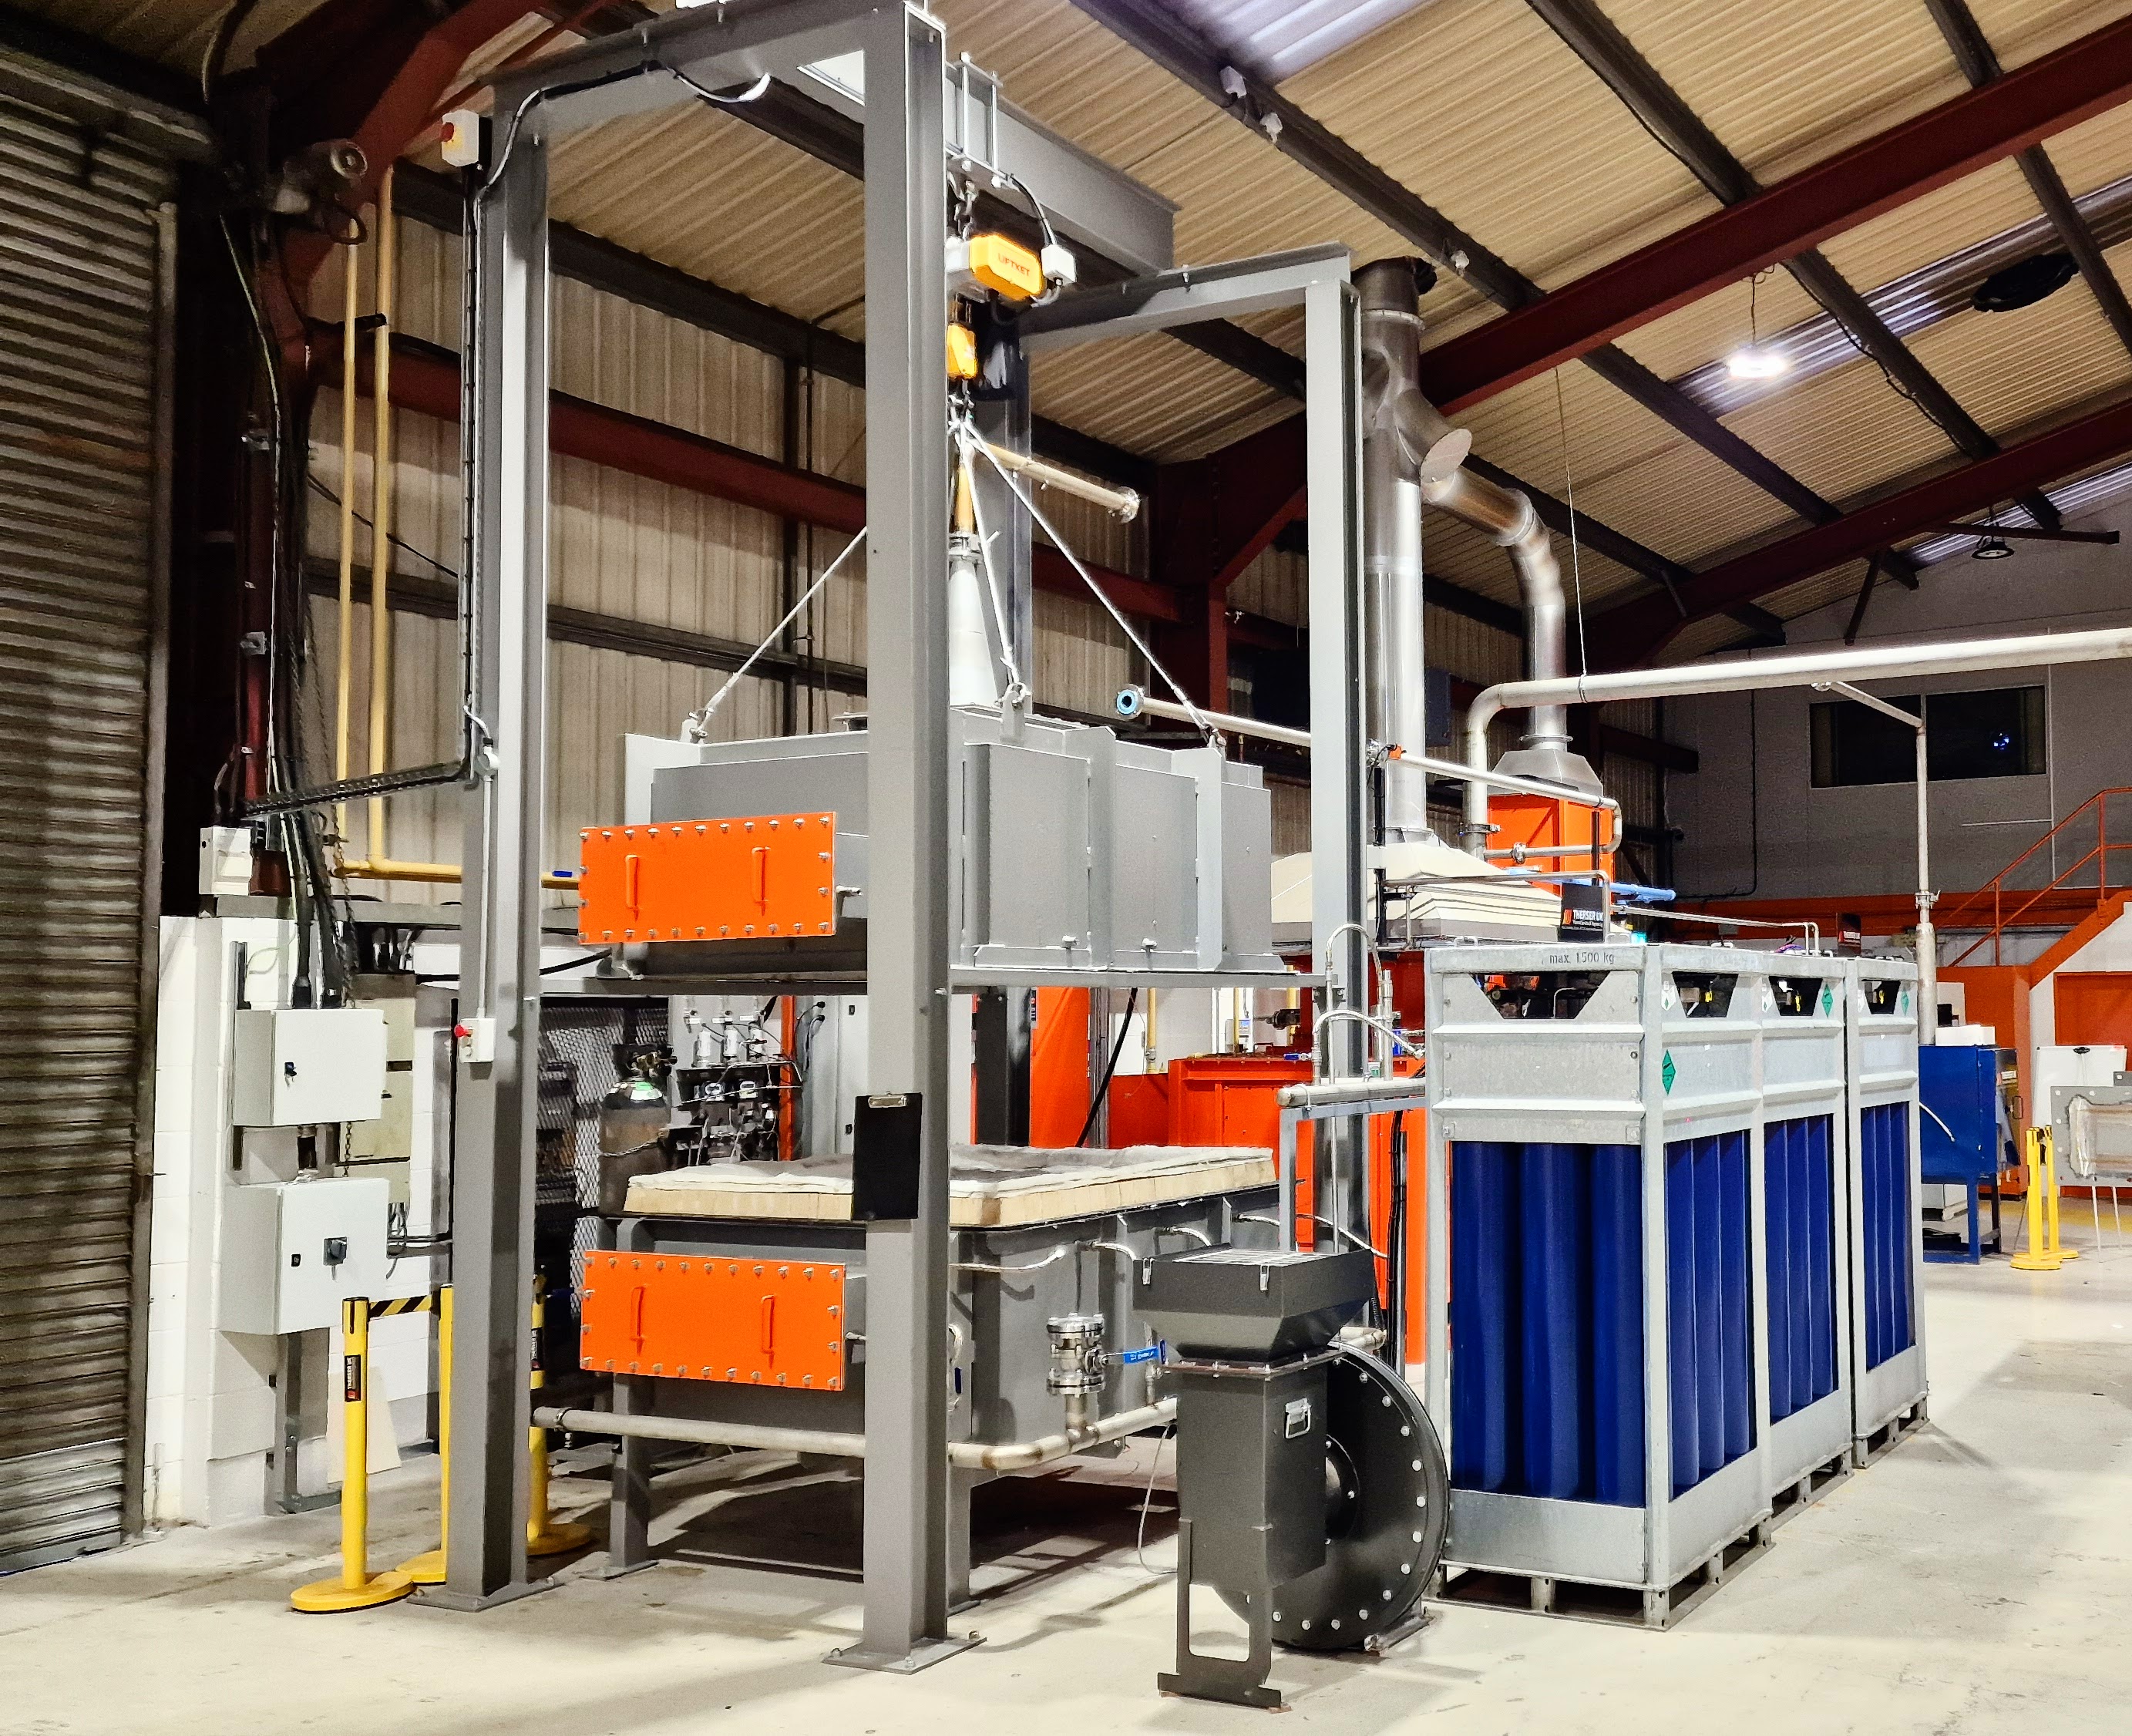 THERSER UK's Electrically Fired Test Kiln is Ready for Your Product!